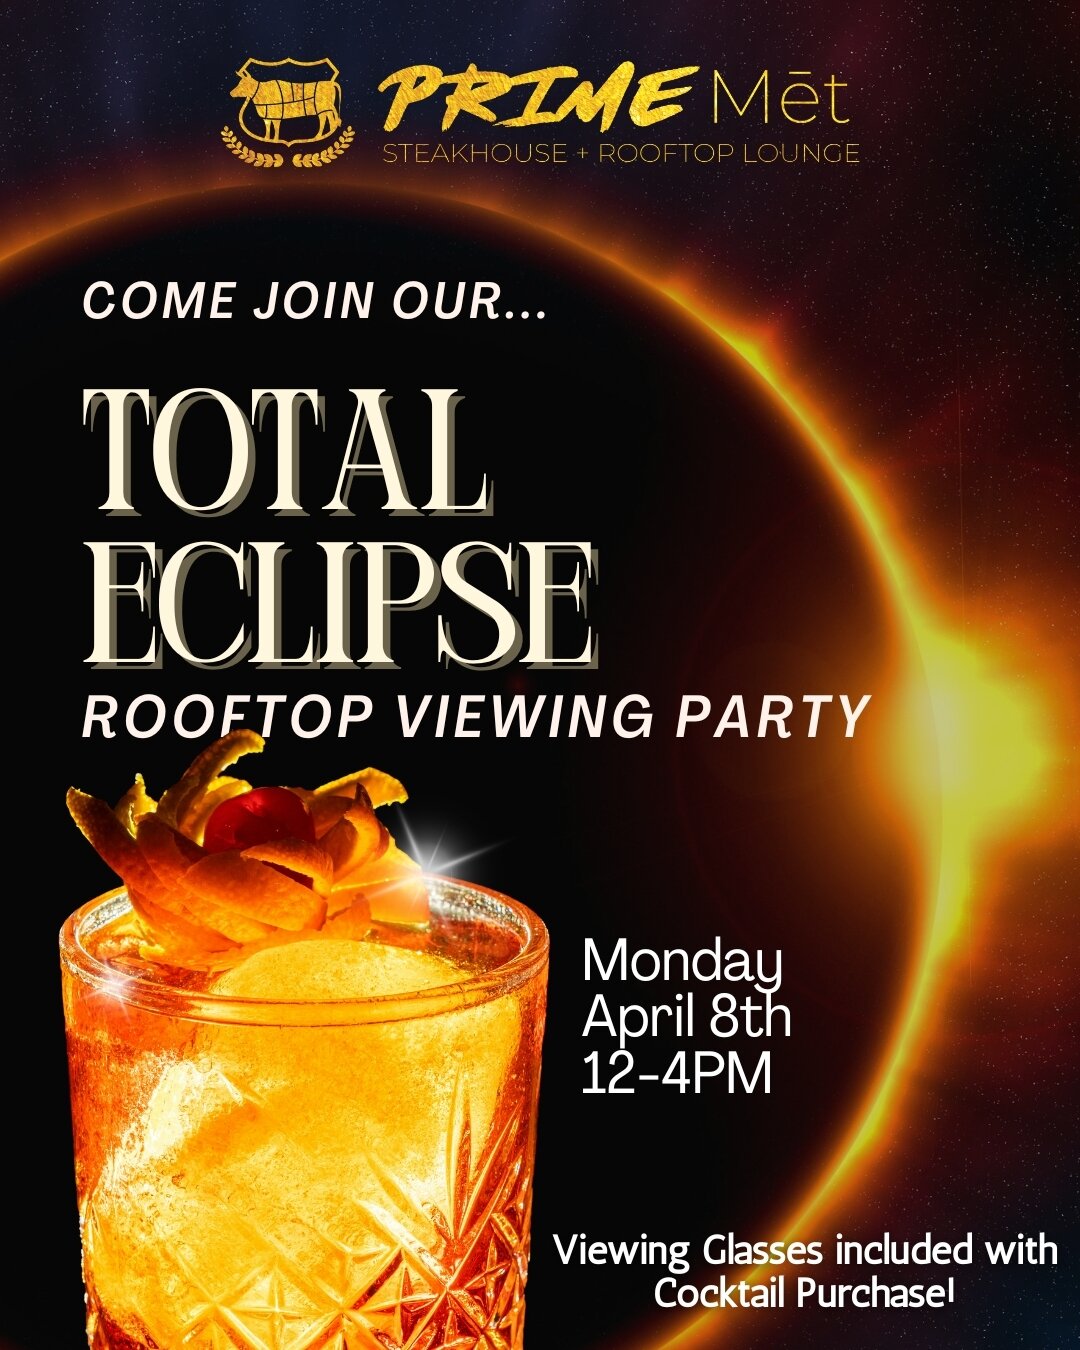 Join us on our rooftop for a rare solar total eclipse viewing party next Monday, April 8th. Receive complimentary viewing glasses with purchase of a cocktail from 12-4pm. 🍸 See y'all there as we witness the sky's spectacular show! 🌑✨🔭😎

#primemet